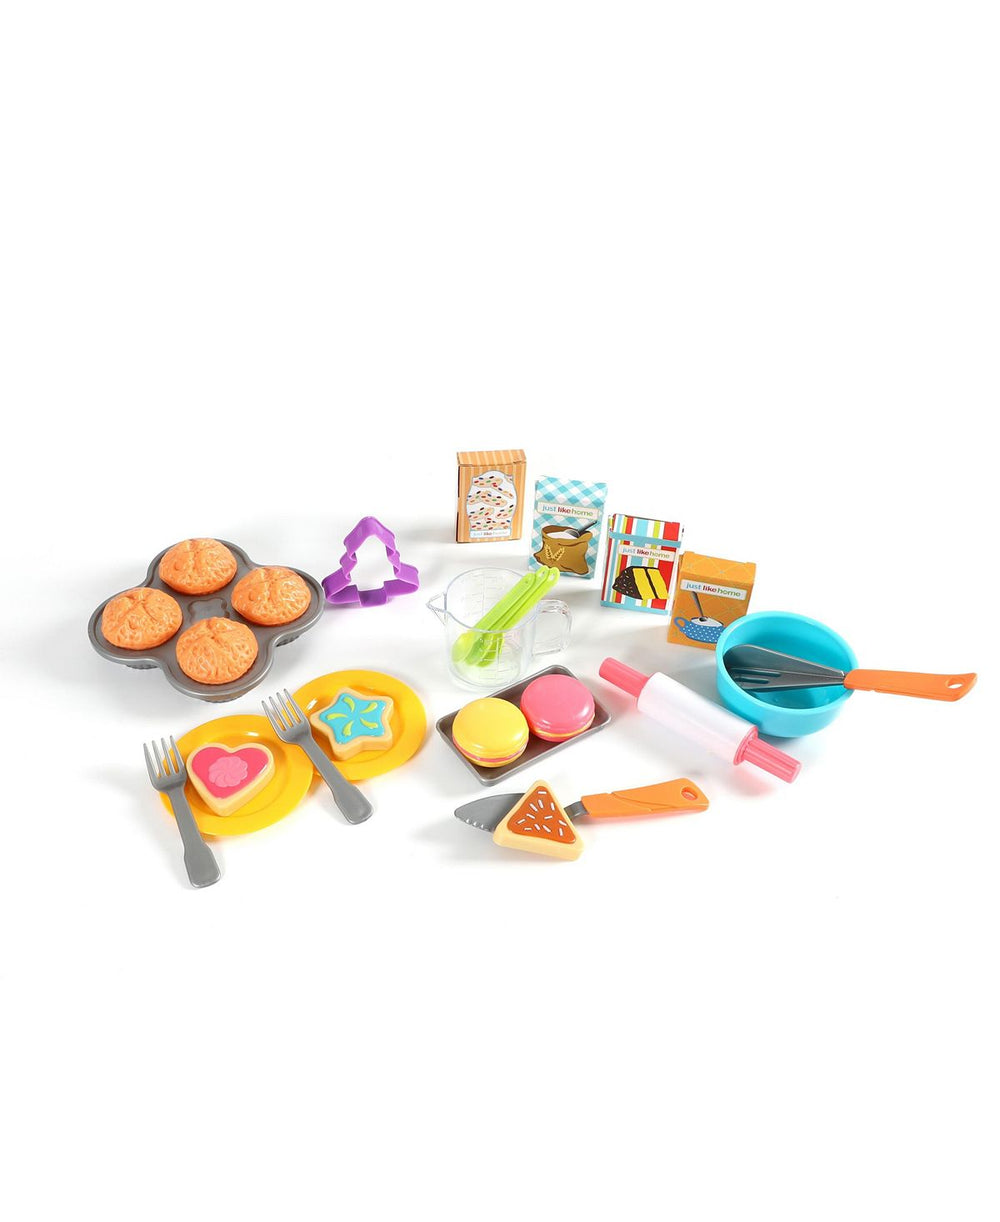 Toys R Us Junior Baker Deluxe Playset - Colorful Baking Tools and Accessories